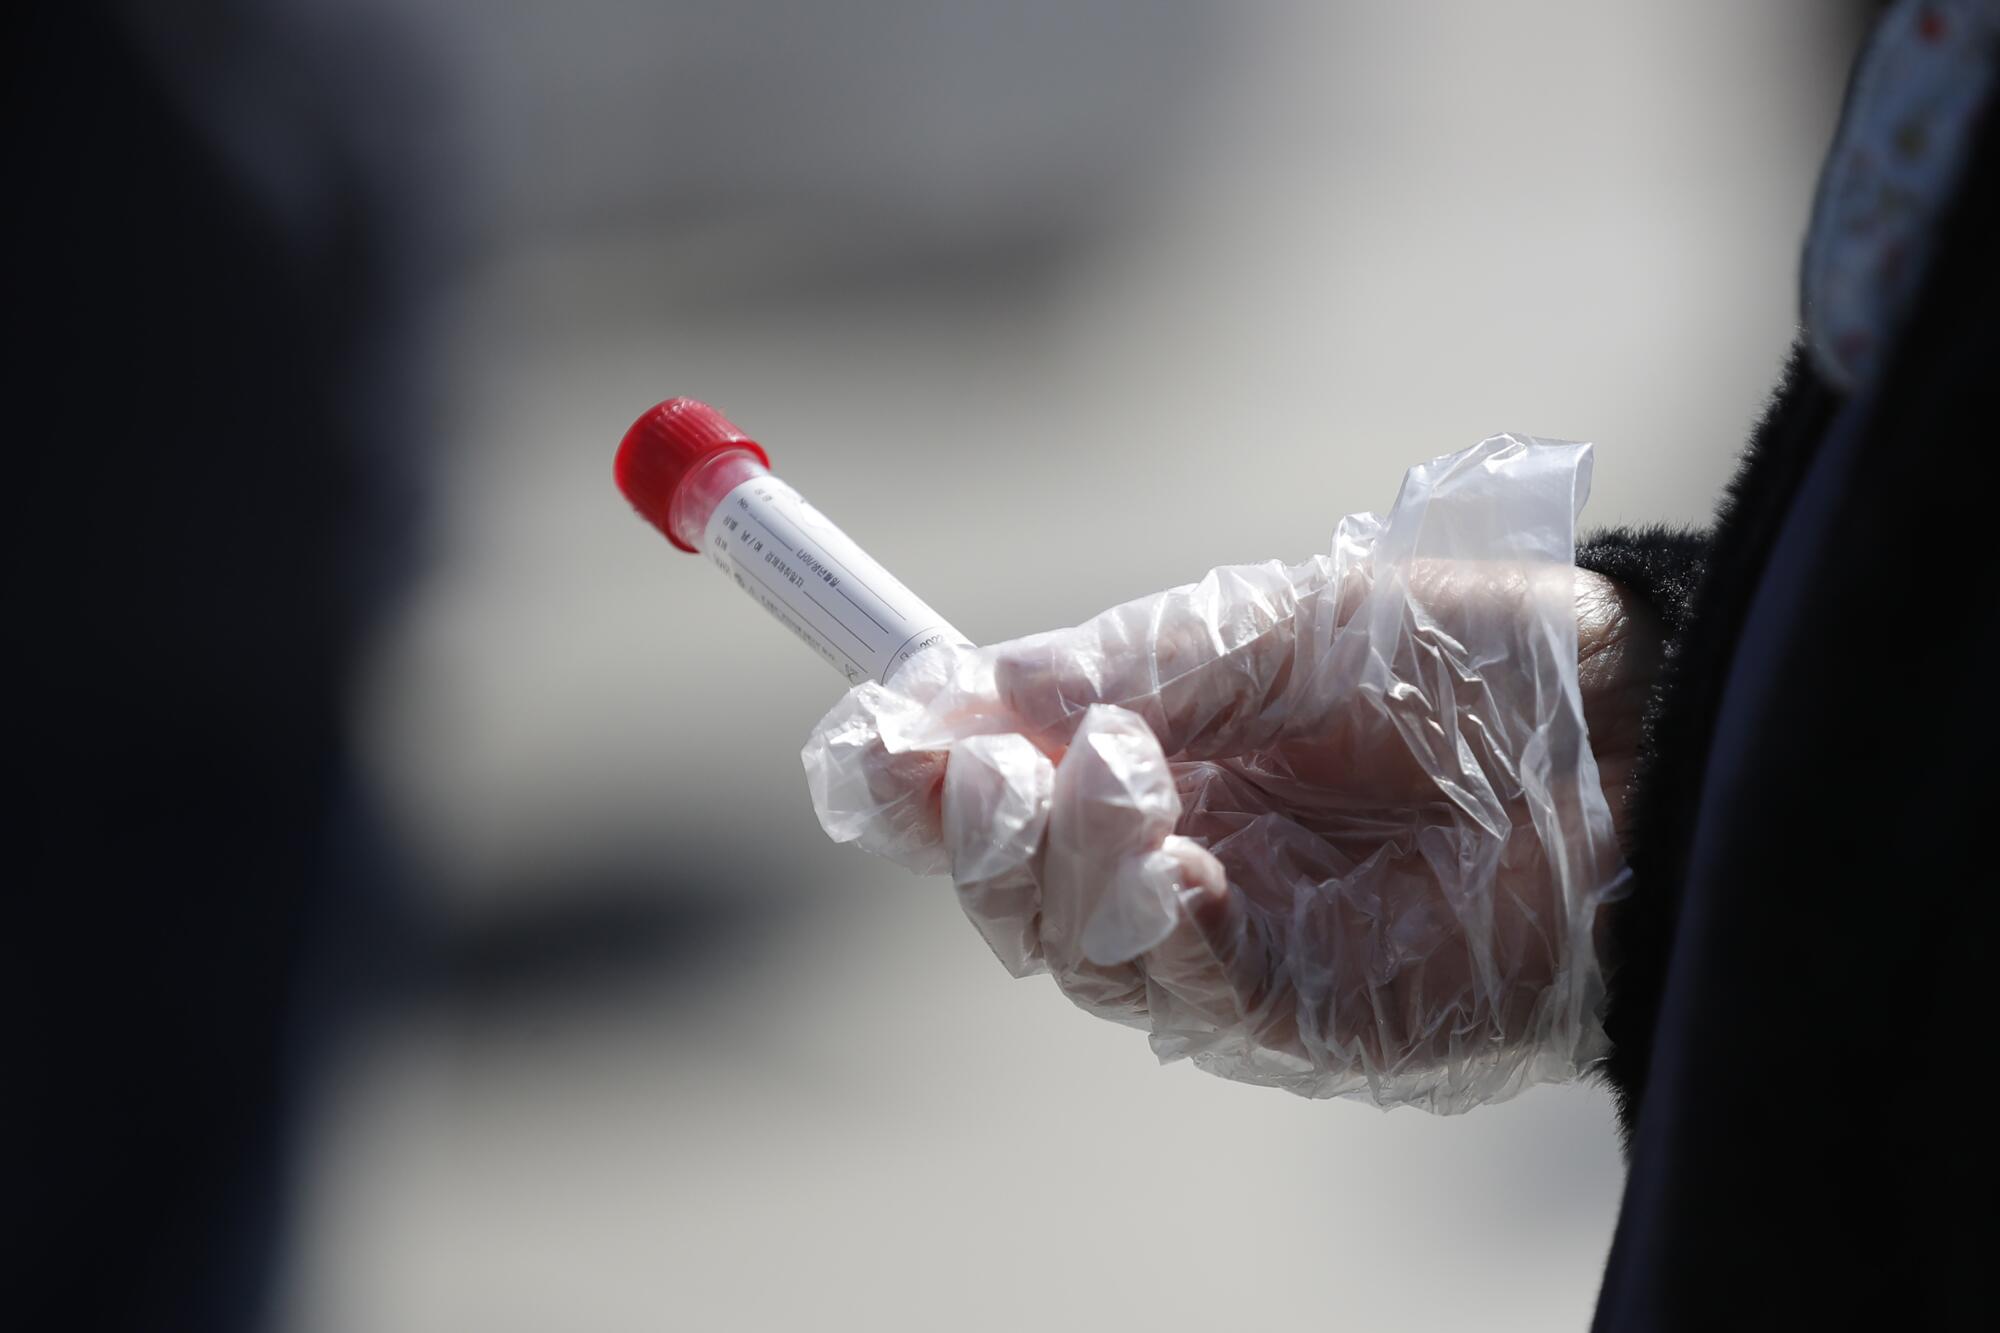 A gloved hand with a vial.